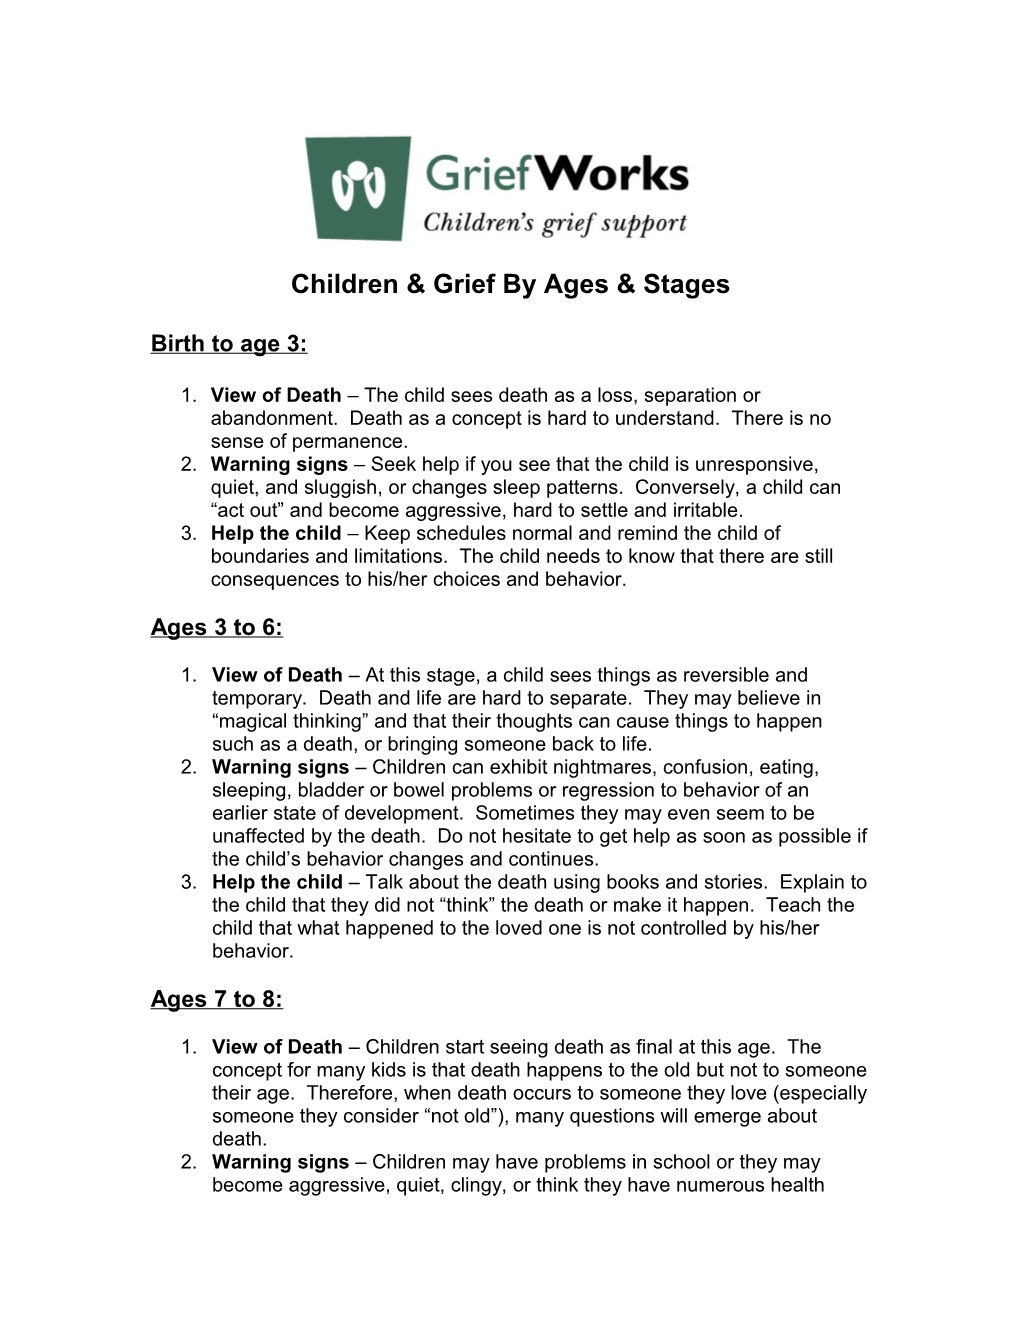 Children & Grief by Ages & Stages